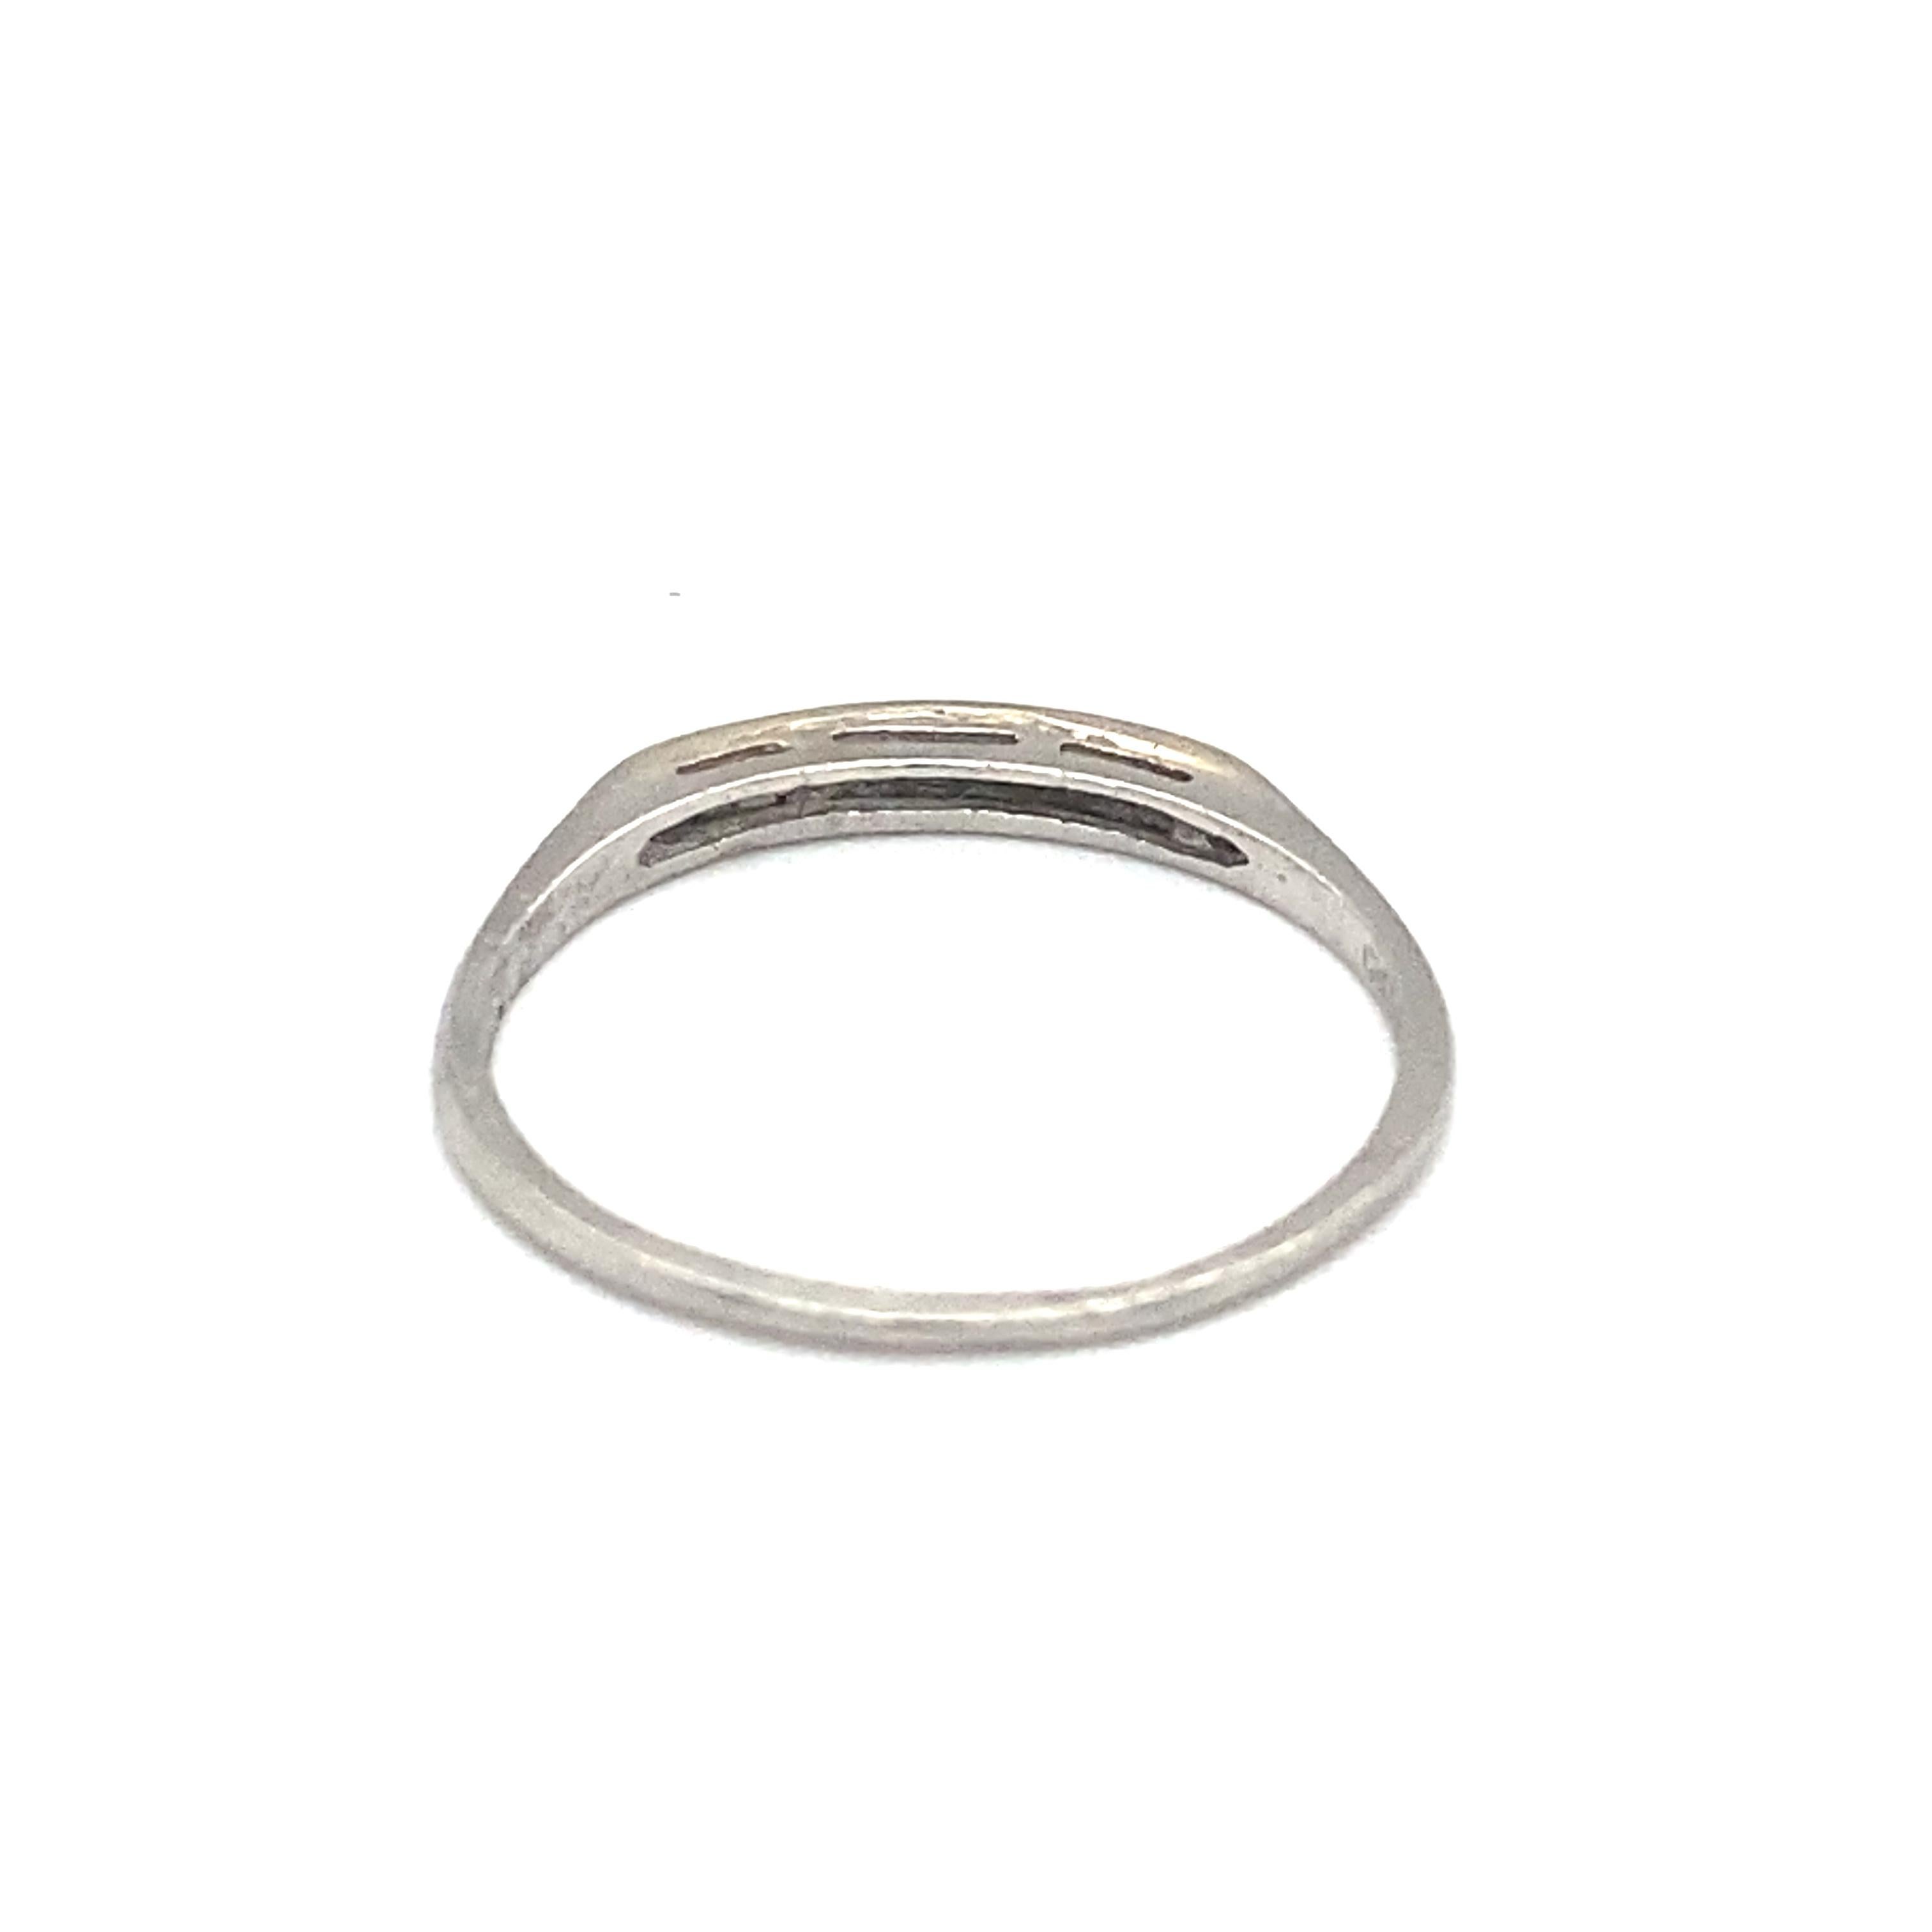 Item Details: This antique wedding band has round single cut and baguette diamonds and is inscribed with a date. It is platinum crafted and all diamonds are bezel. 

Circa: 1930s
Metal Type: Platinum
Weight: 1.9 grams
Size: US 8, resizable